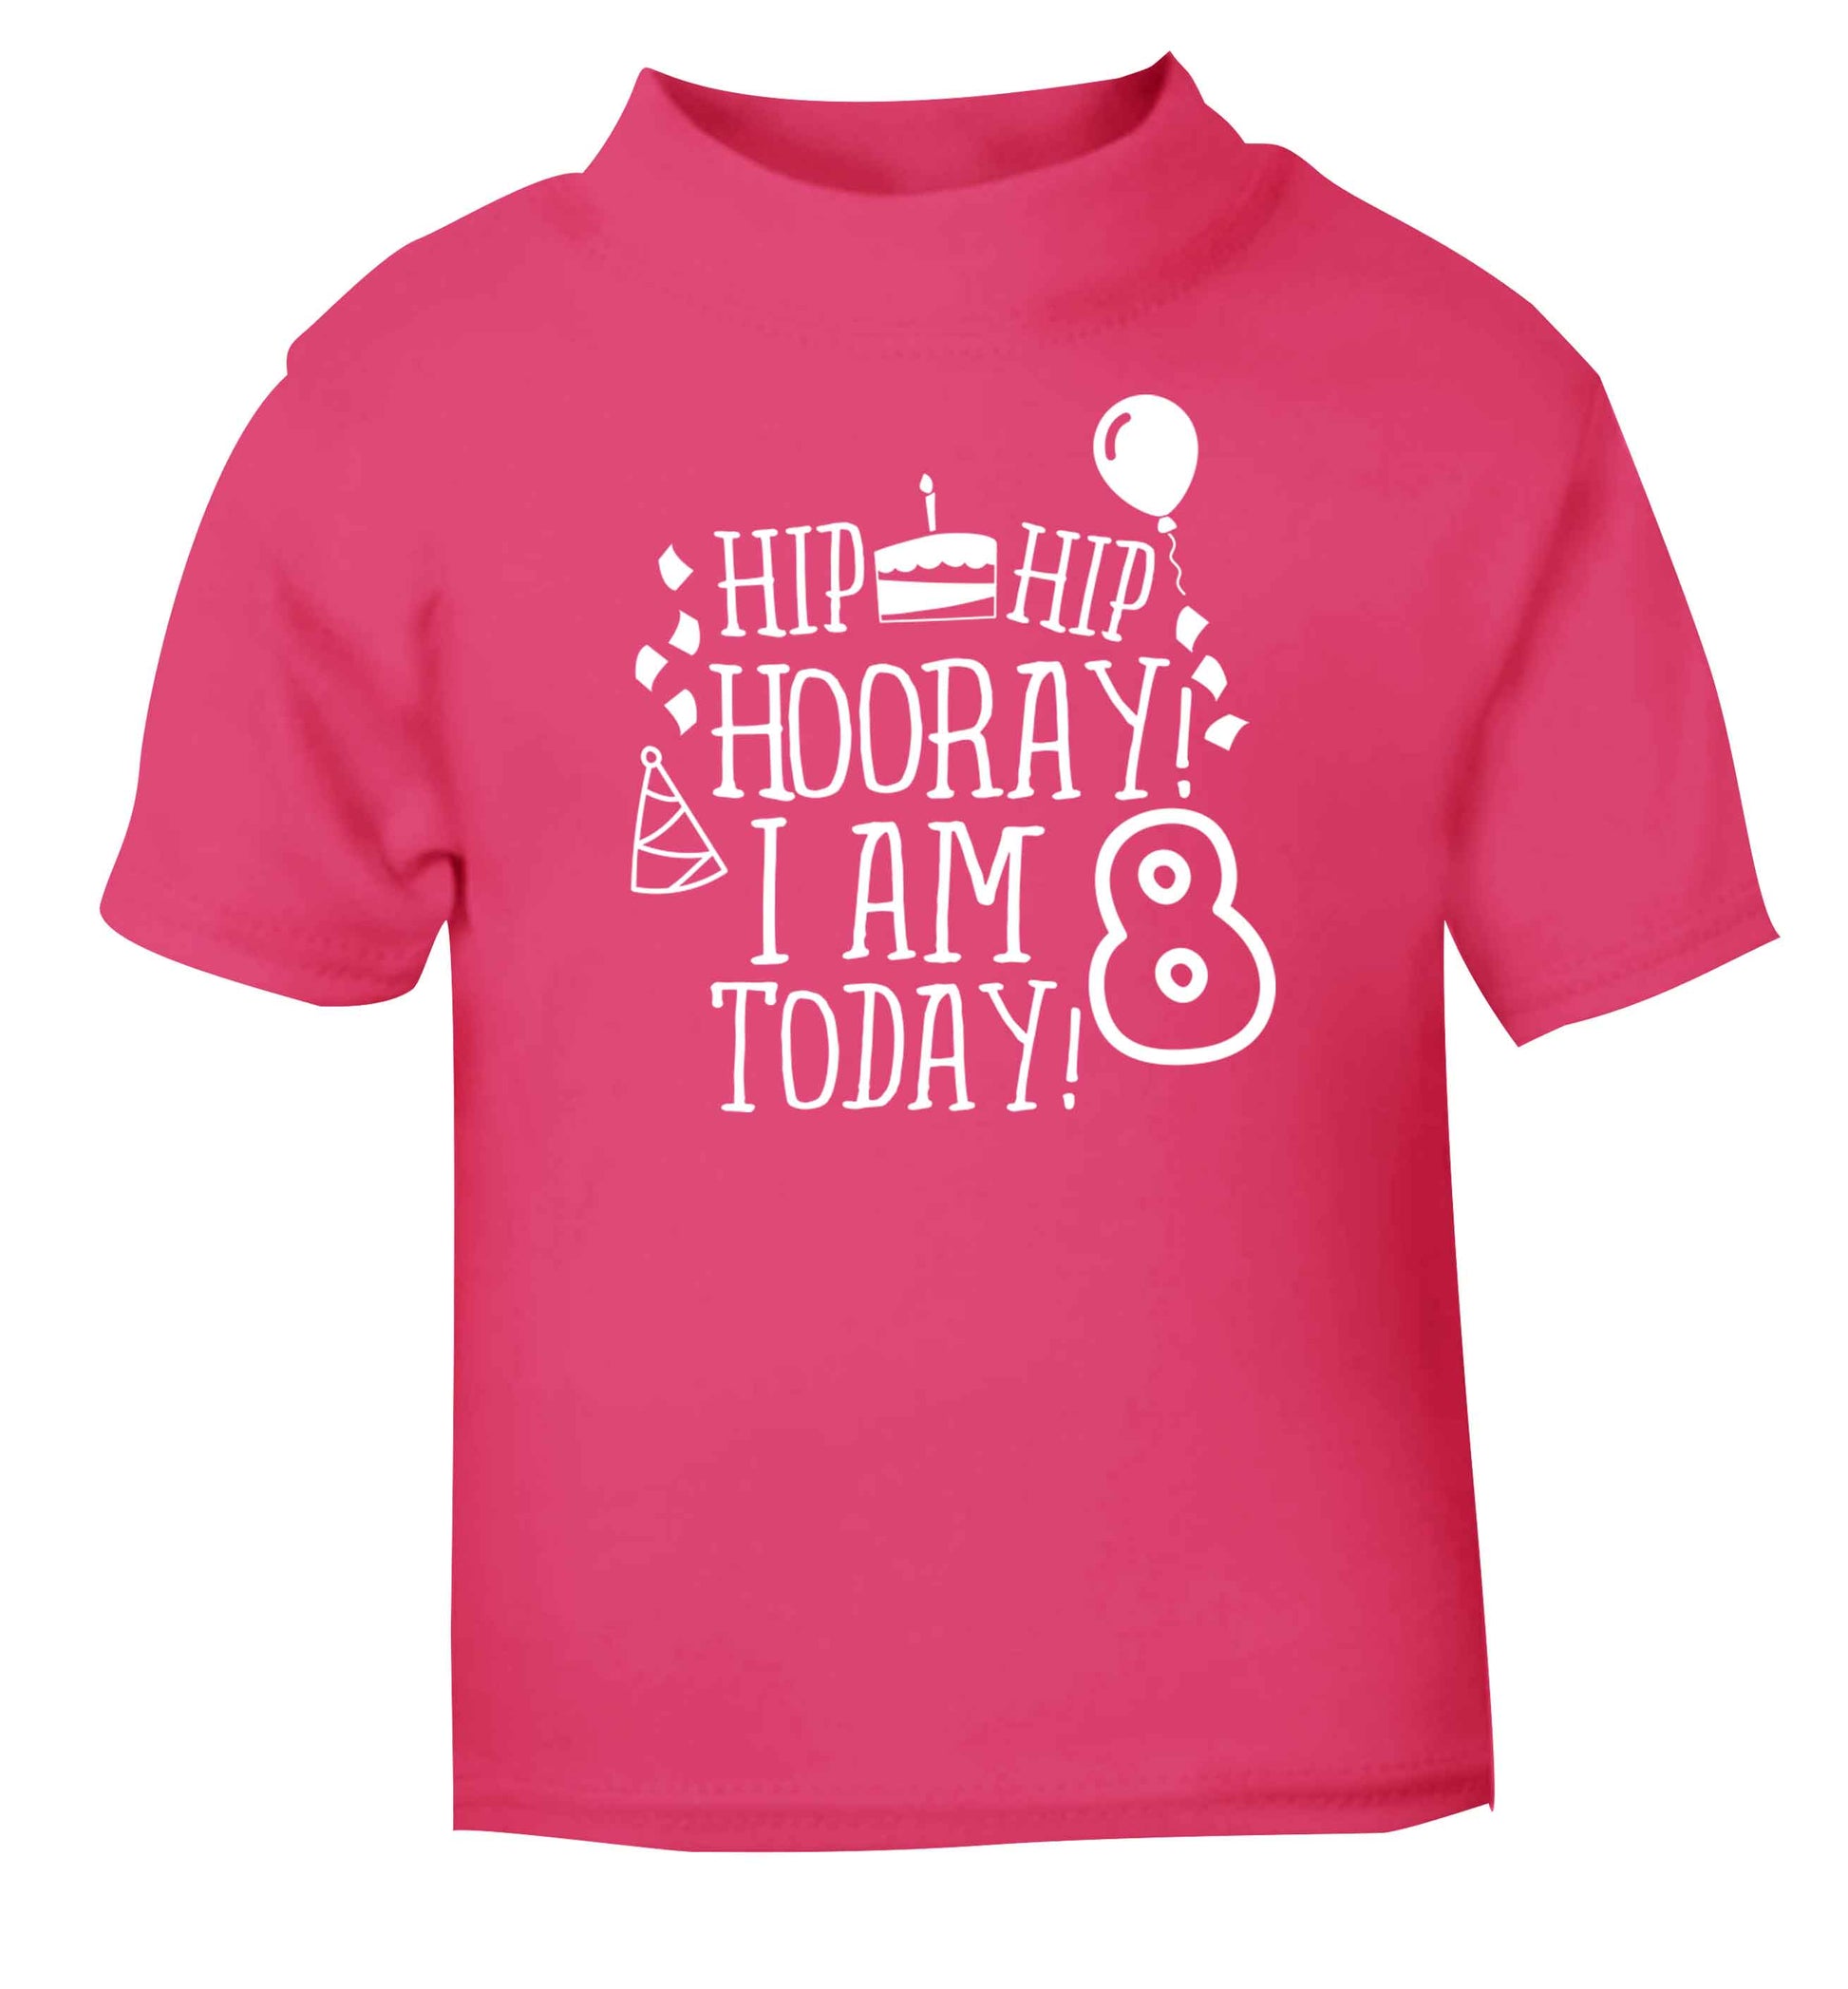 Hip hip hooray I am 8 today! pink baby toddler Tshirt 2 Years